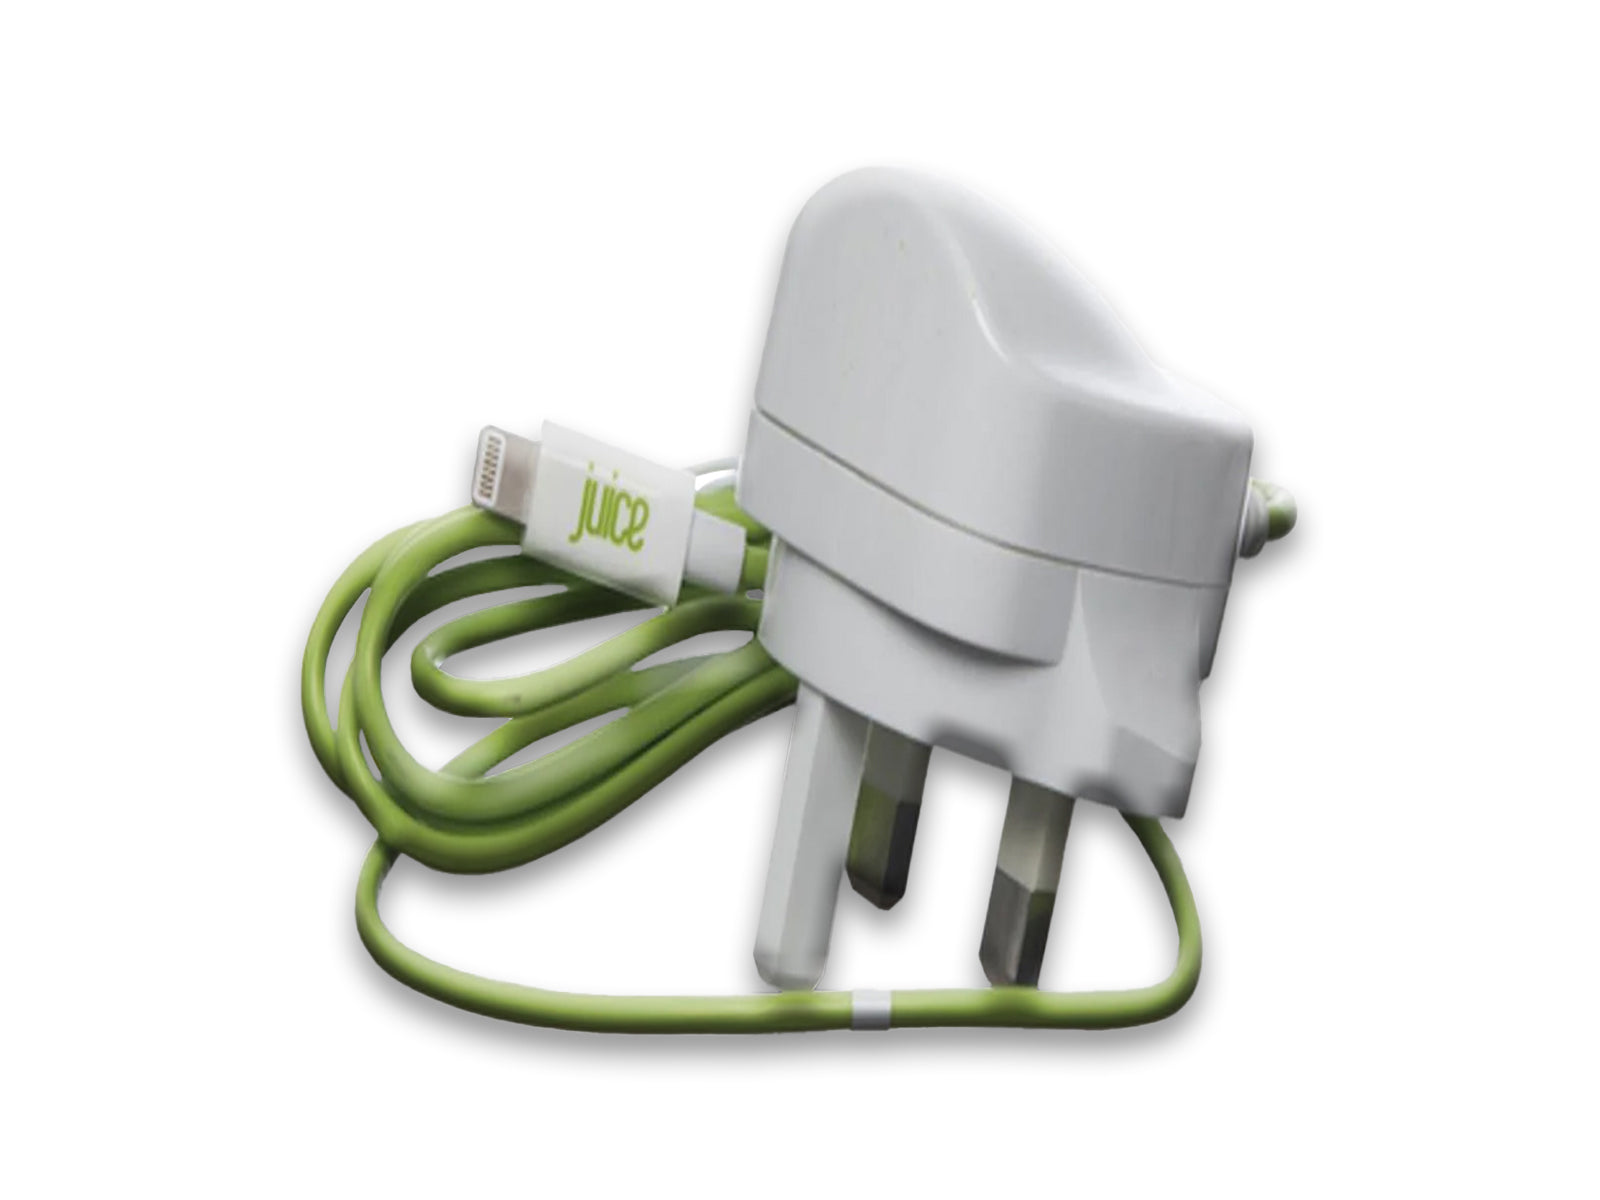 Juice Lightning Mains Charger